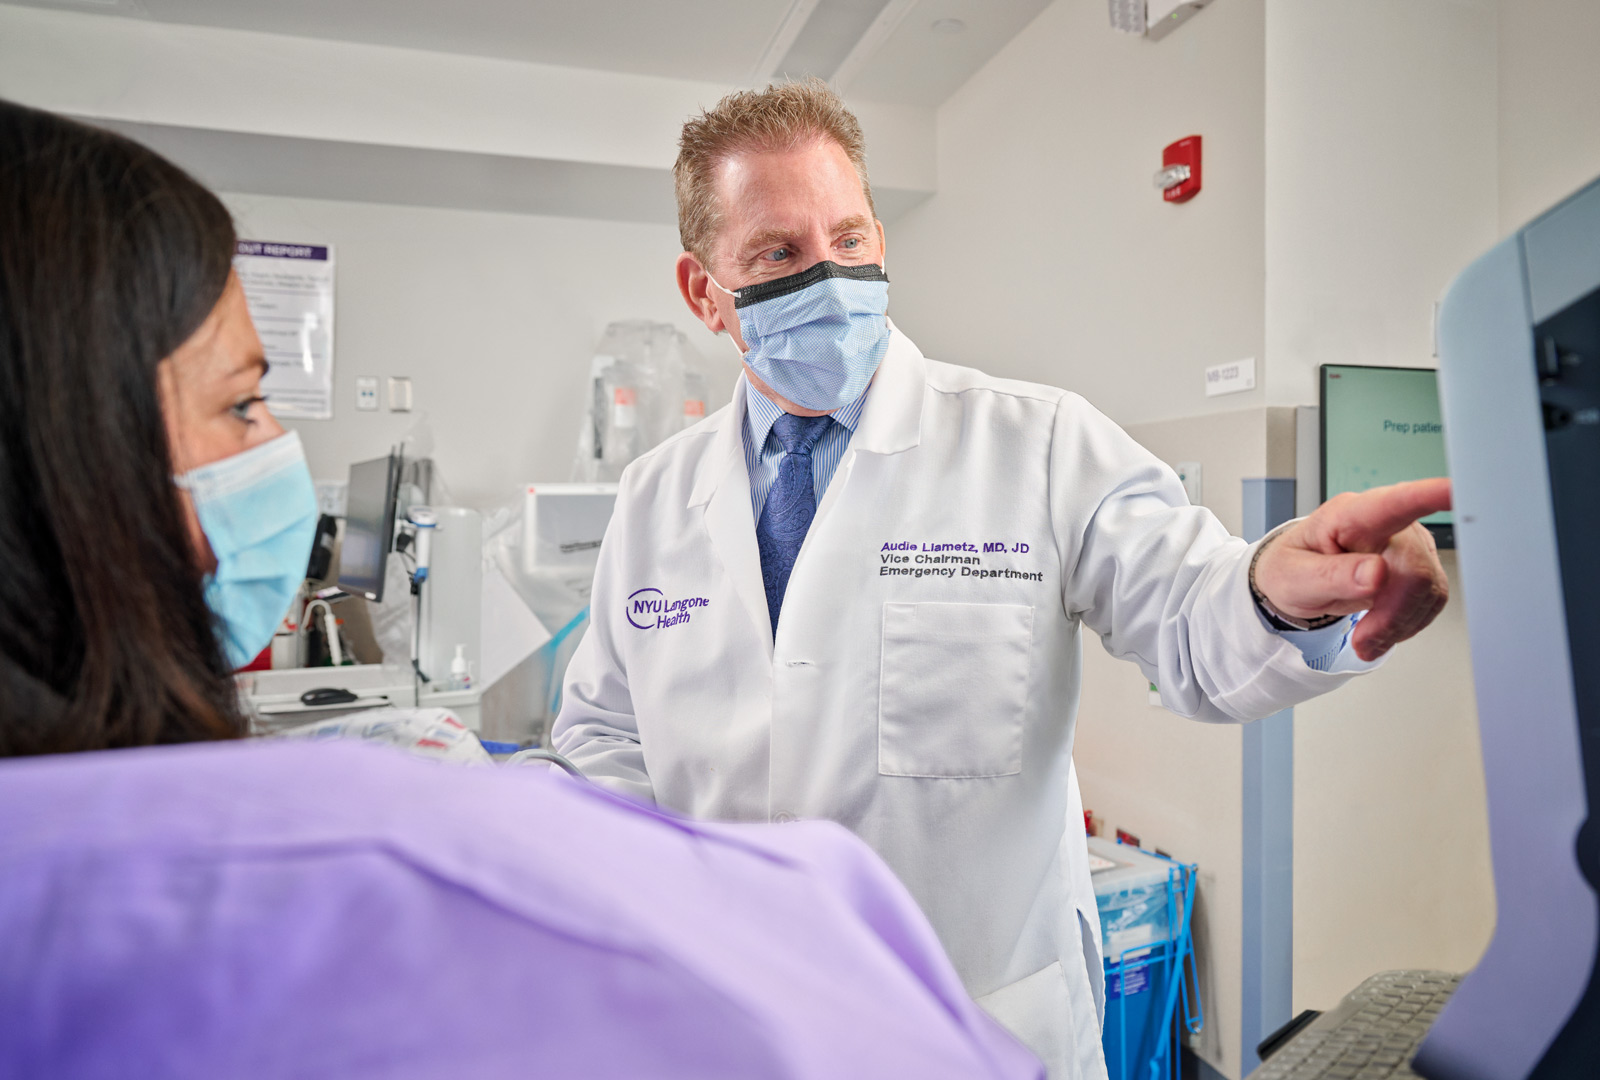 Dr. Audie Liametz Performs Ultrasound-Guided Procedure